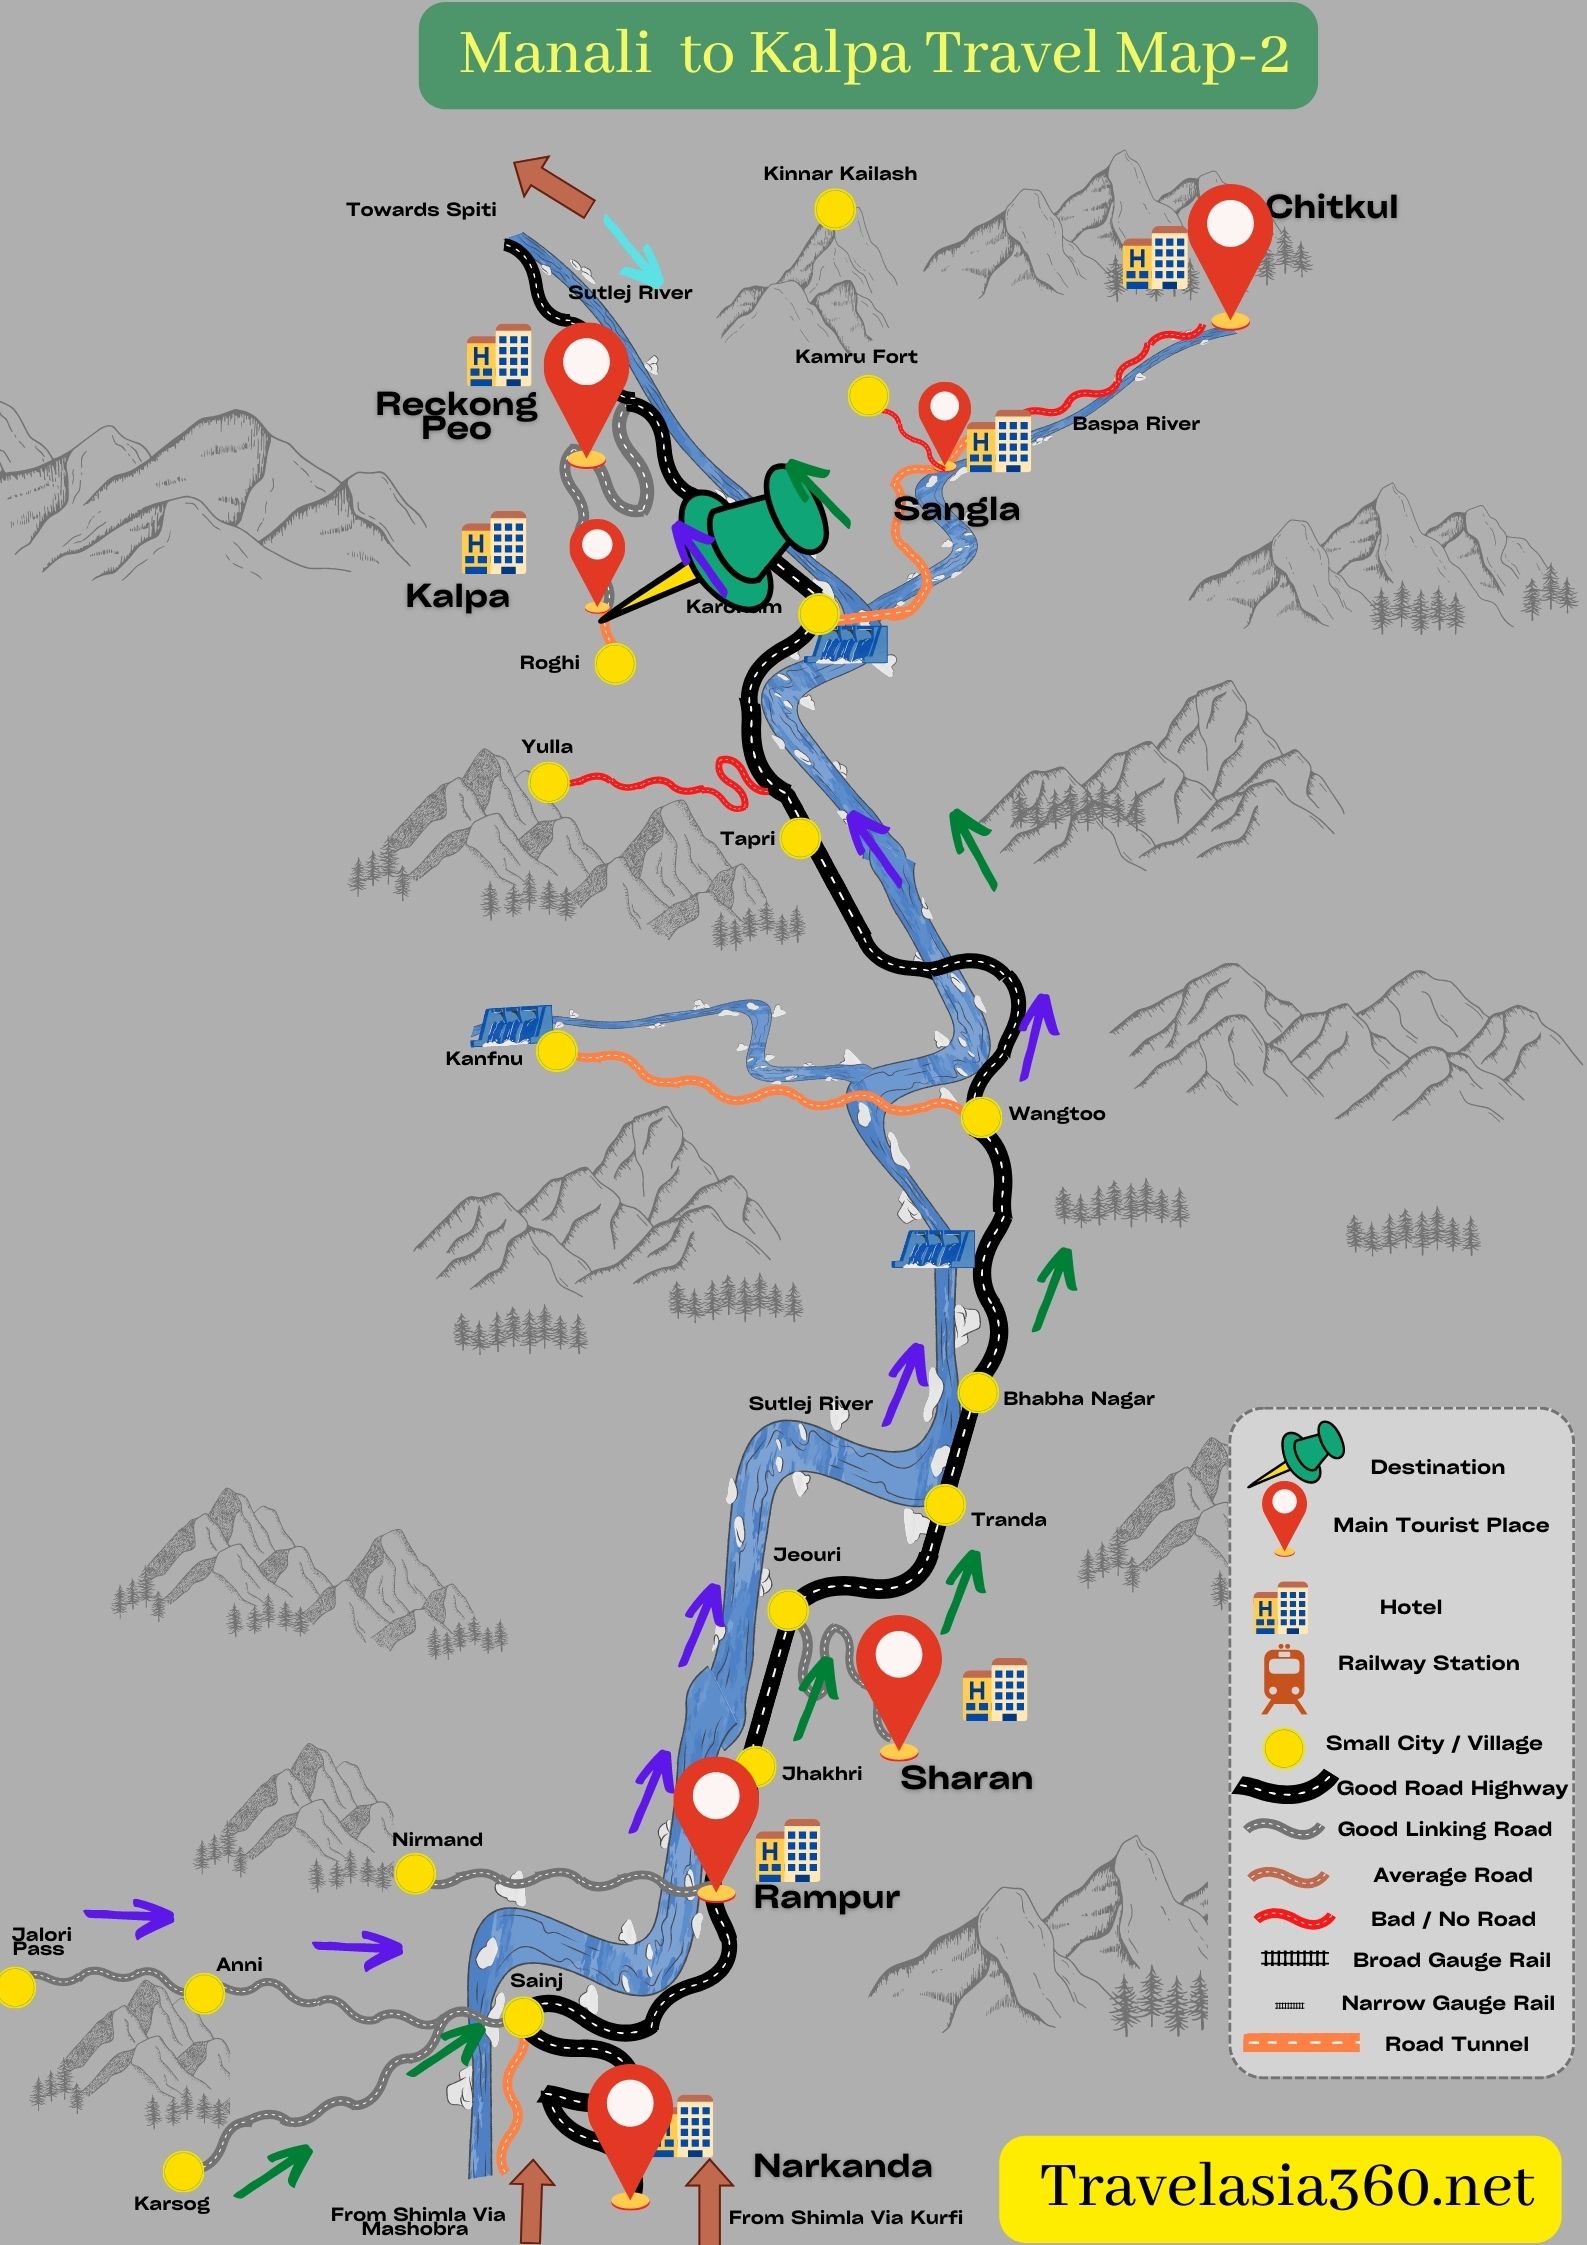 how to reach Kalpa from Manali